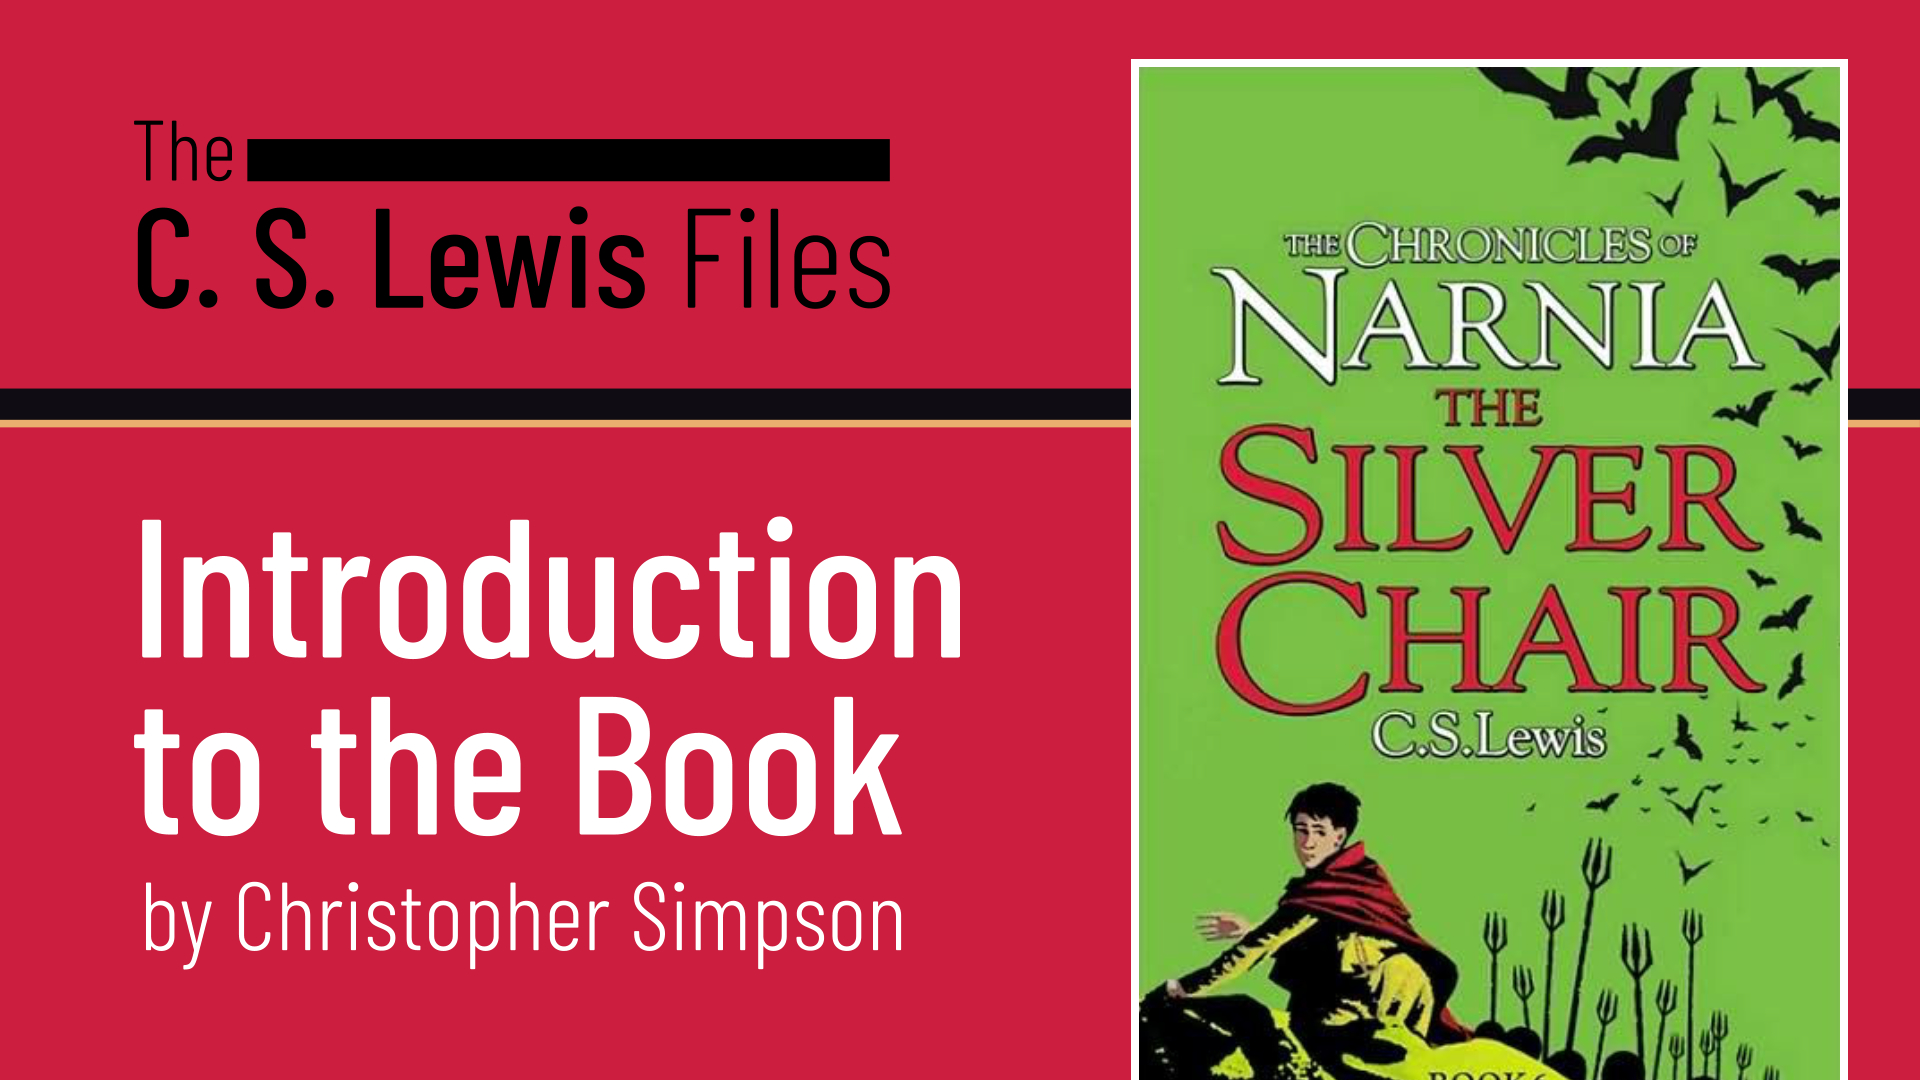 The C.S. Lewis Files: The Silver Chair 